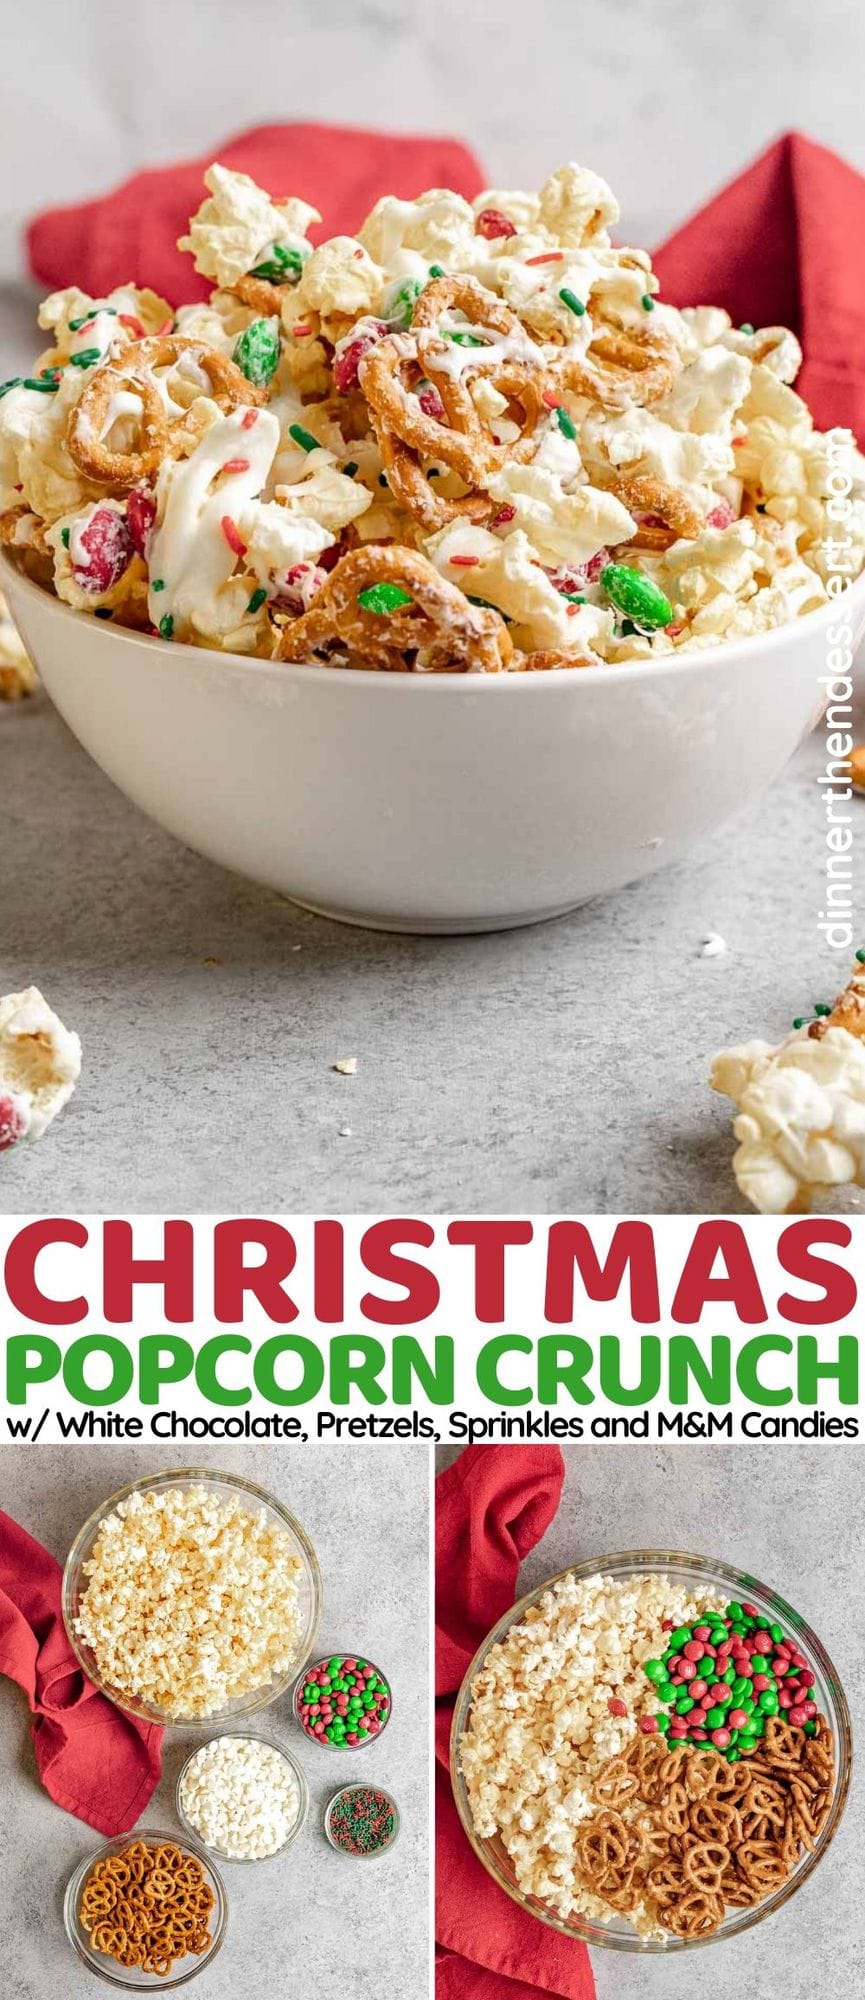 Christmas Popcorn Crunch in Bowl collage